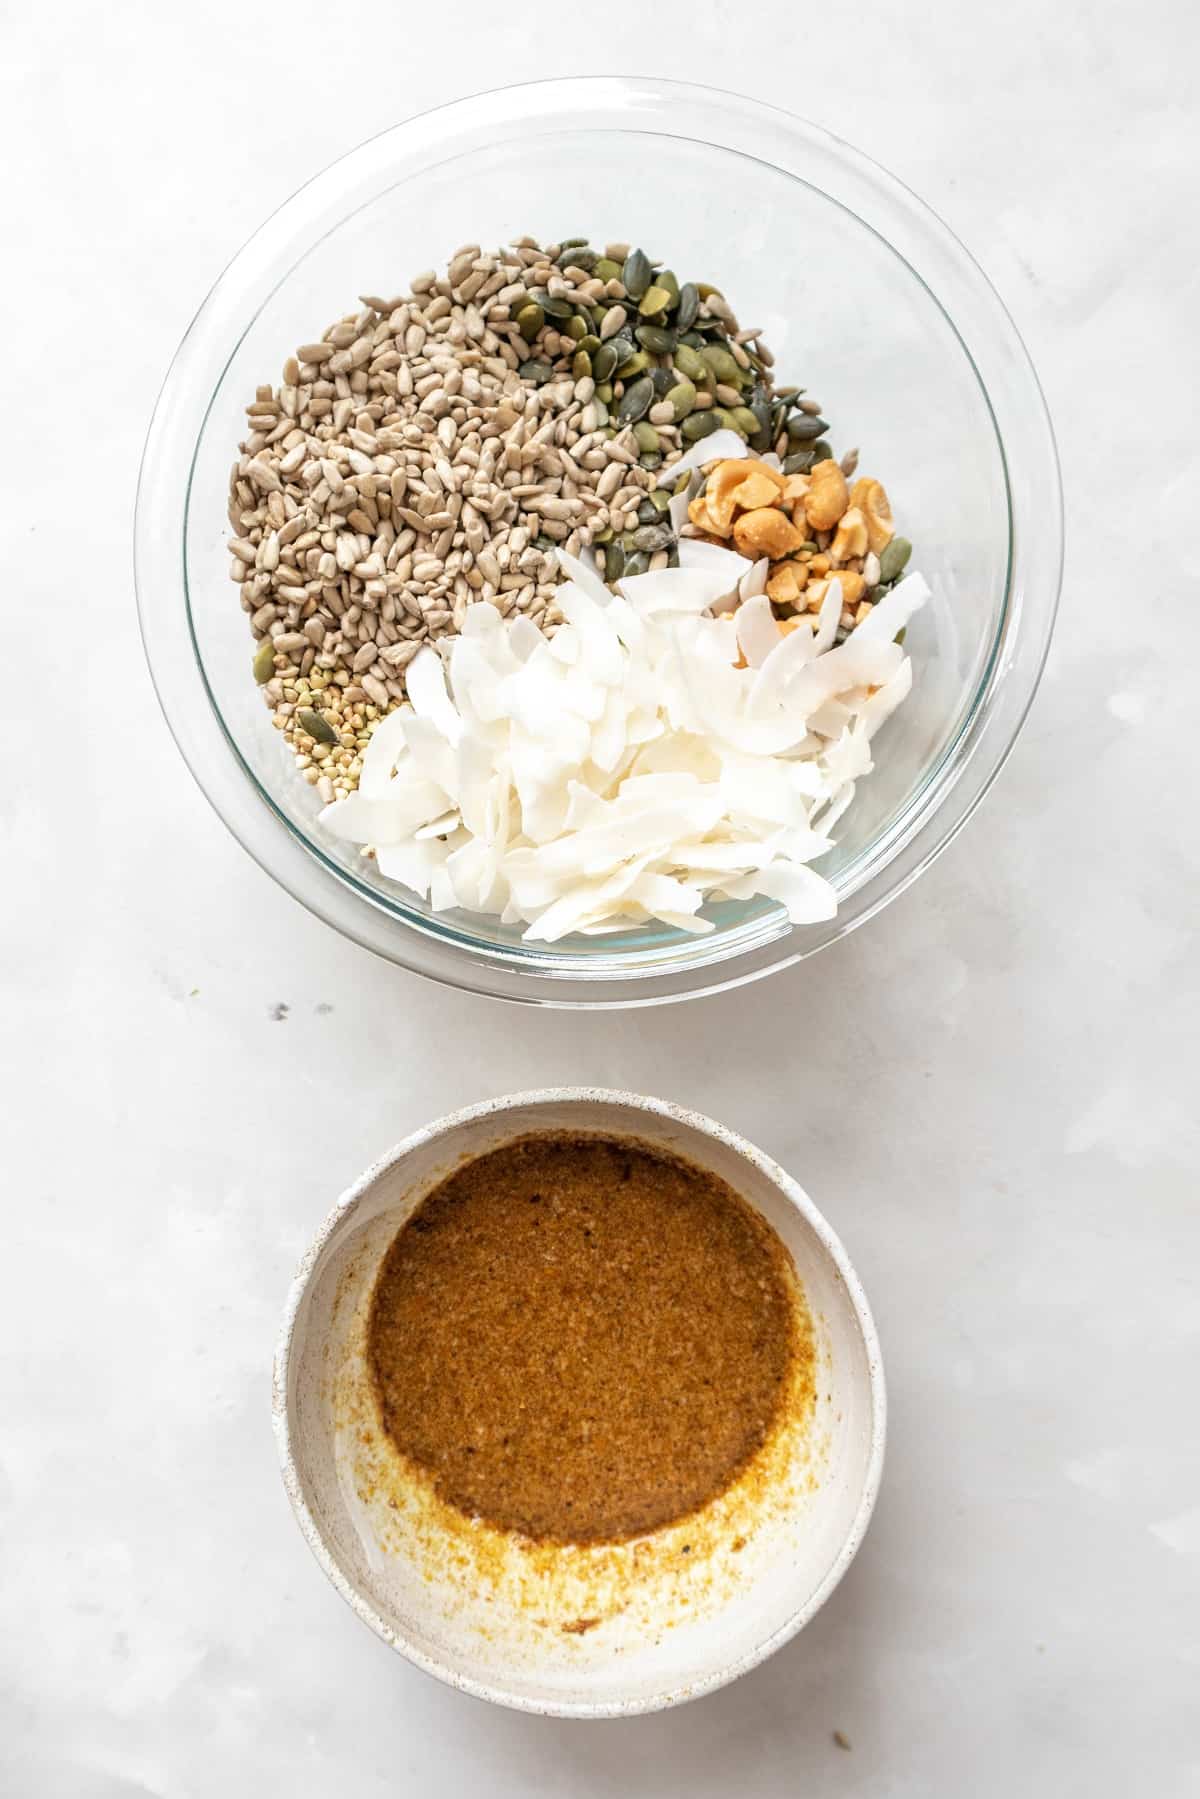 Combine the wet mix ingredients, and the dry mix ingredients in separate bowls